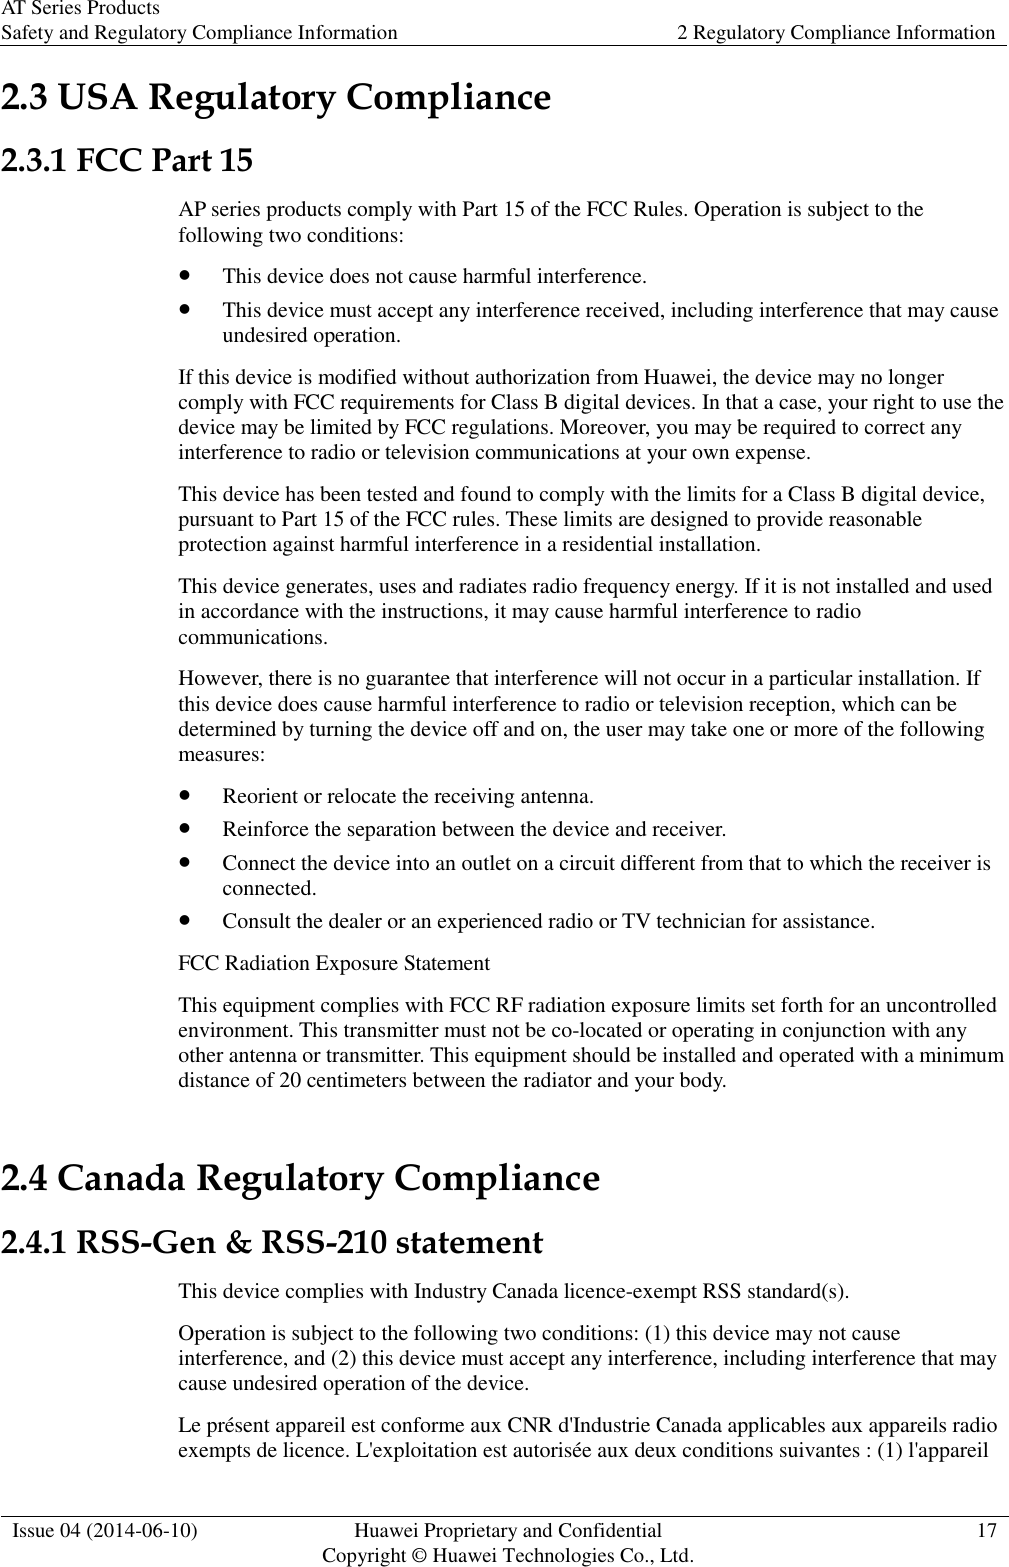 AT Series Products Safety and Regulatory Compliance Information 2 Regulatory Compliance Information  Issue 04 (2014-06-10) Huawei Proprietary and Confidential           Copyright © Huawei Technologies Co., Ltd. 17  2.3 USA Regulatory Compliance 2.3.1 FCC Part 15 AP series products comply with Part 15 of the FCC Rules. Operation is subject to the following two conditions:  This device does not cause harmful interference.  This device must accept any interference received, including interference that may cause undesired operation. If this device is modified without authorization from Huawei, the device may no longer comply with FCC requirements for Class B digital devices. In that a case, your right to use the device may be limited by FCC regulations. Moreover, you may be required to correct any interference to radio or television communications at your own expense. This device has been tested and found to comply with the limits for a Class B digital device, pursuant to Part 15 of the FCC rules. These limits are designed to provide reasonable protection against harmful interference in a residential installation. This device generates, uses and radiates radio frequency energy. If it is not installed and used in accordance with the instructions, it may cause harmful interference to radio communications. However, there is no guarantee that interference will not occur in a particular installation. If this device does cause harmful interference to radio or television reception, which can be determined by turning the device off and on, the user may take one or more of the following measures:  Reorient or relocate the receiving antenna.  Reinforce the separation between the device and receiver.  Connect the device into an outlet on a circuit different from that to which the receiver is connected.  Consult the dealer or an experienced radio or TV technician for assistance. FCC Radiation Exposure Statement   This equipment complies with FCC RF radiation exposure limits set forth for an uncontrolled environment. This transmitter must not be co-located or operating in conjunction with any other antenna or transmitter. This equipment should be installed and operated with a minimum distance of 20 centimeters between the radiator and your body. 2.4 Canada Regulatory Compliance 2.4.1 RSS-Gen &amp; RSS-210 statement This device complies with Industry Canada licence-exempt RSS standard(s). Operation is subject to the following two conditions: (1) this device may not cause interference, and (2) this device must accept any interference, including interference that may cause undesired operation of the device. Le présent appareil est conforme aux CNR d&apos;Industrie Canada applicables aux appareils radio exempts de licence. L&apos;exploitation est autorisée aux deux conditions suivantes : (1) l&apos;appareil 